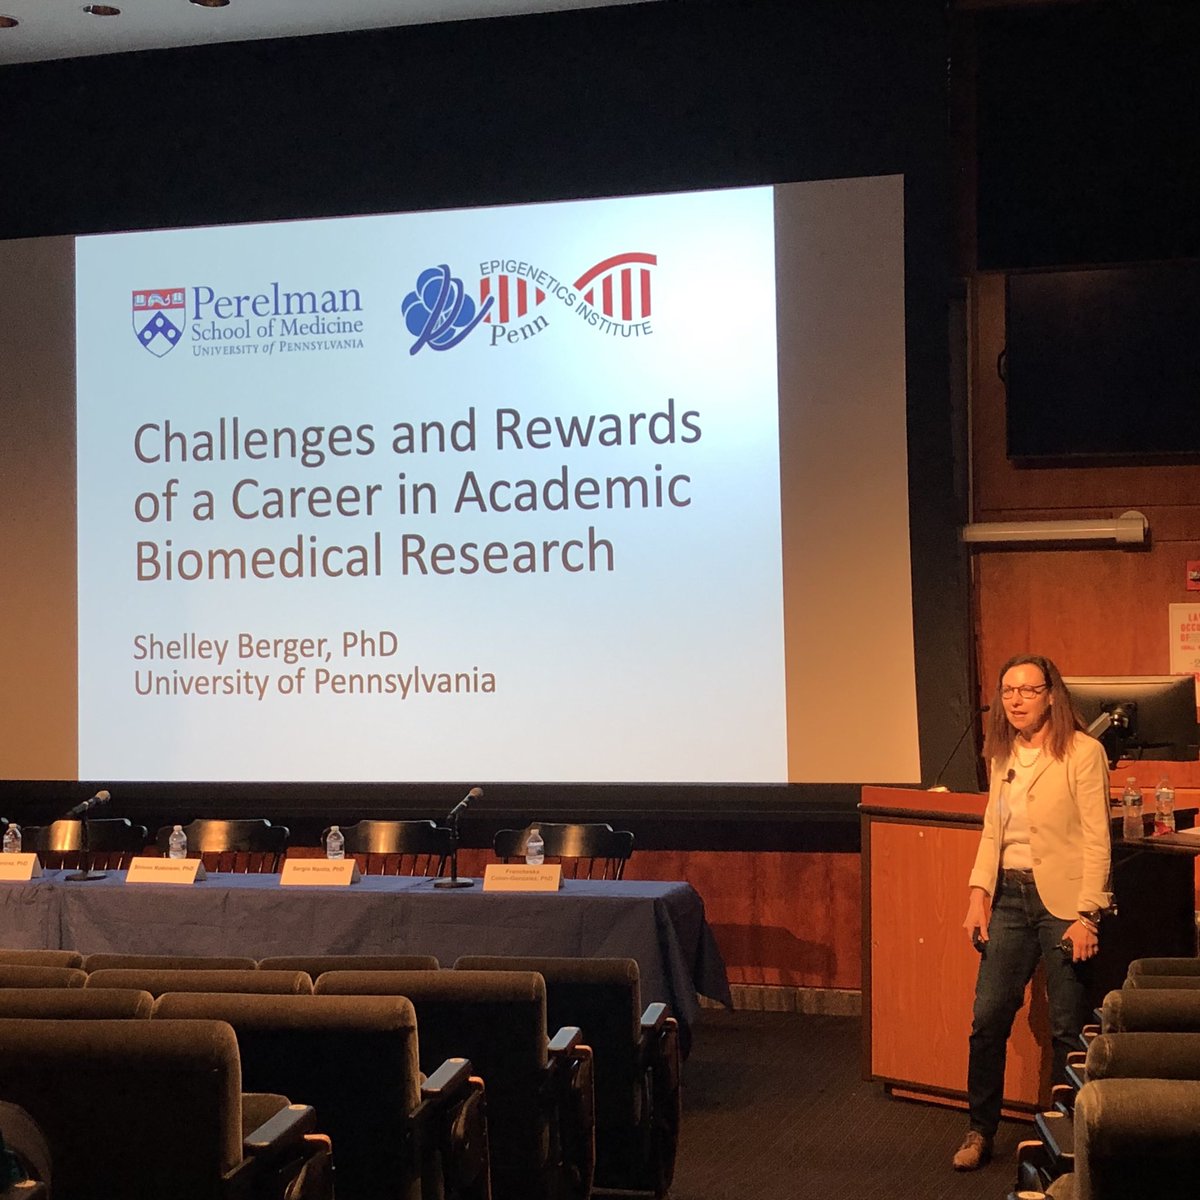 Our PI and mentor Dr. Shelley L Berger had the great opportunity to share a little about her career pathway, including challenges and rewards throughout over 20 years!